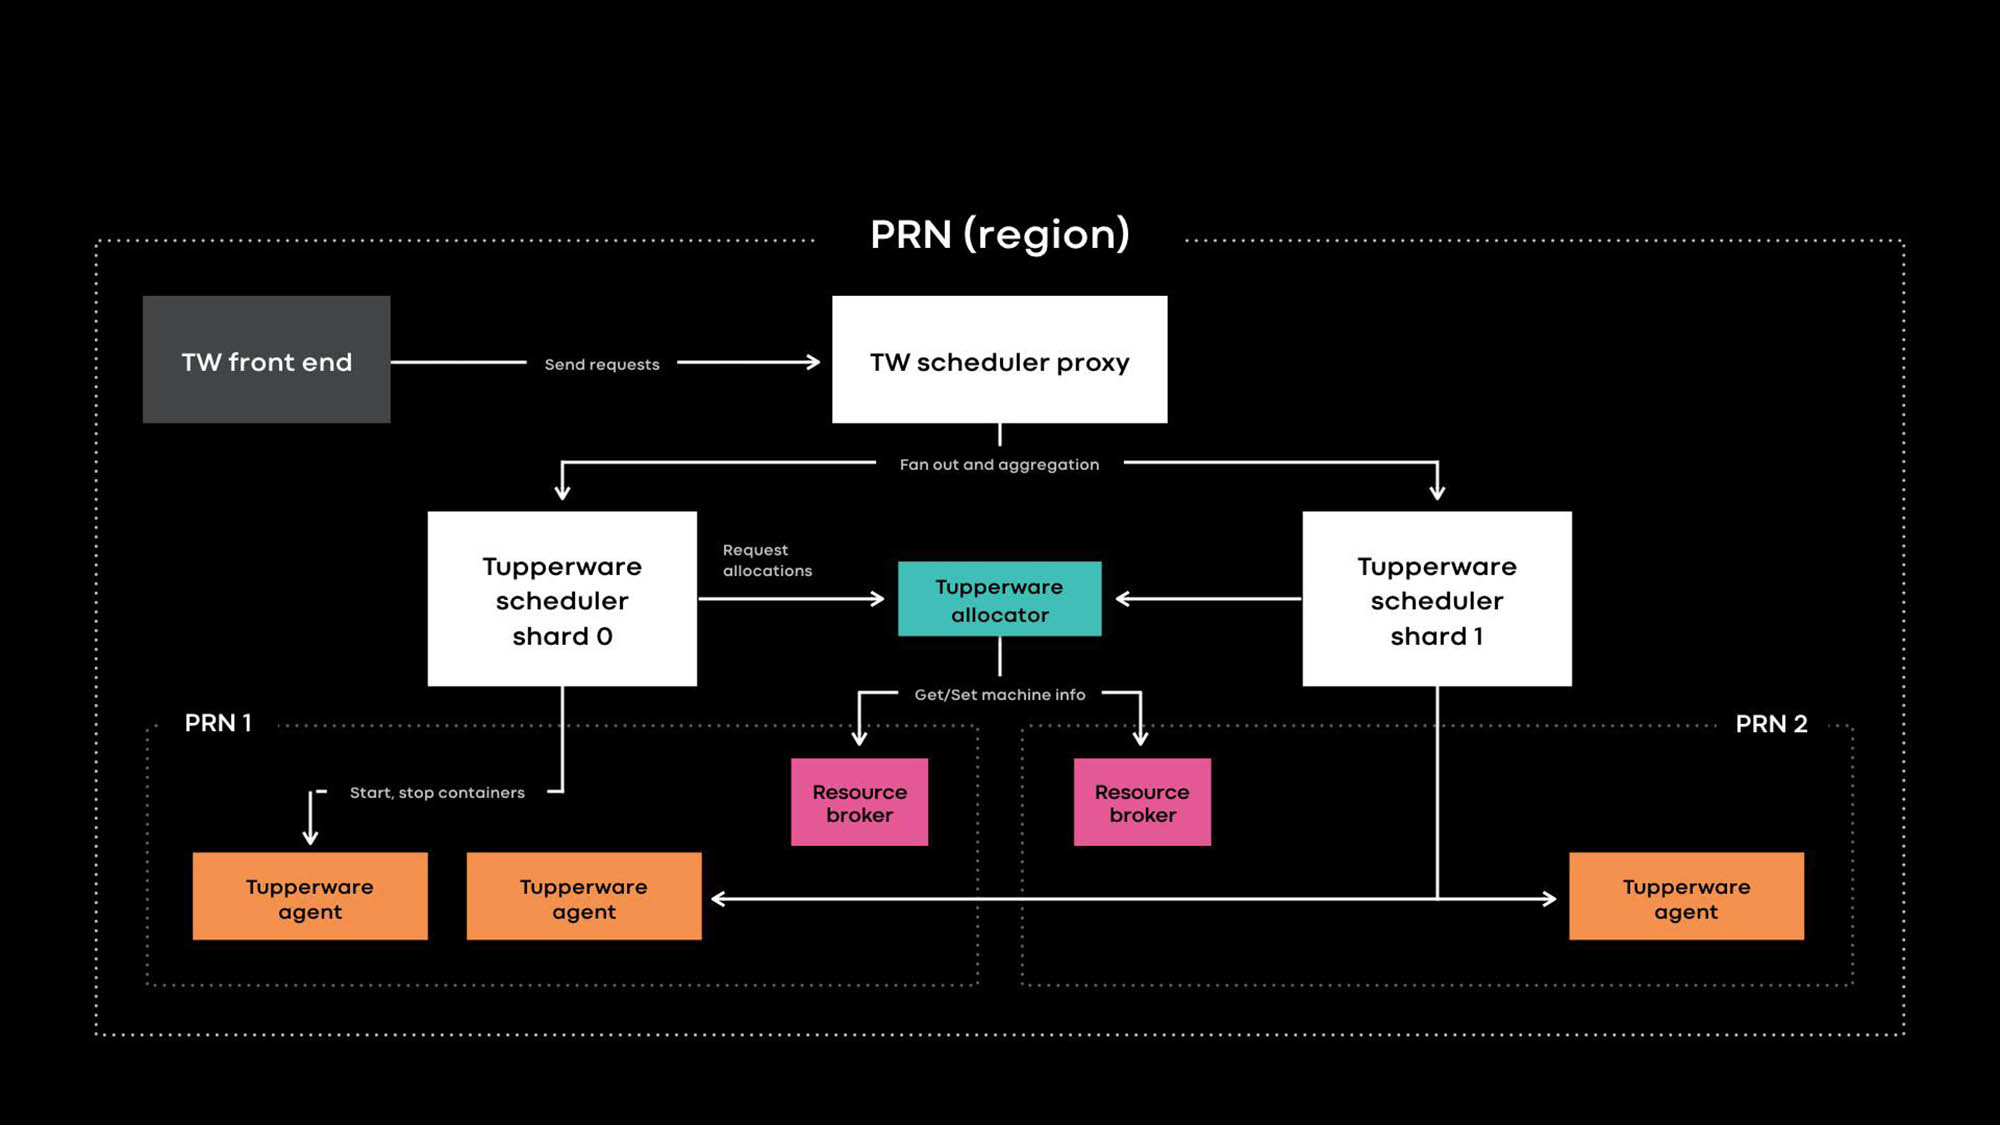 Facebook's container management system, Twine. PRN is one of our data center regions. A region consists of multiple data center buildings (PRN1 and PRN2) located next to one another. We are moving toward one control plane per region that manages all the servers in that region.